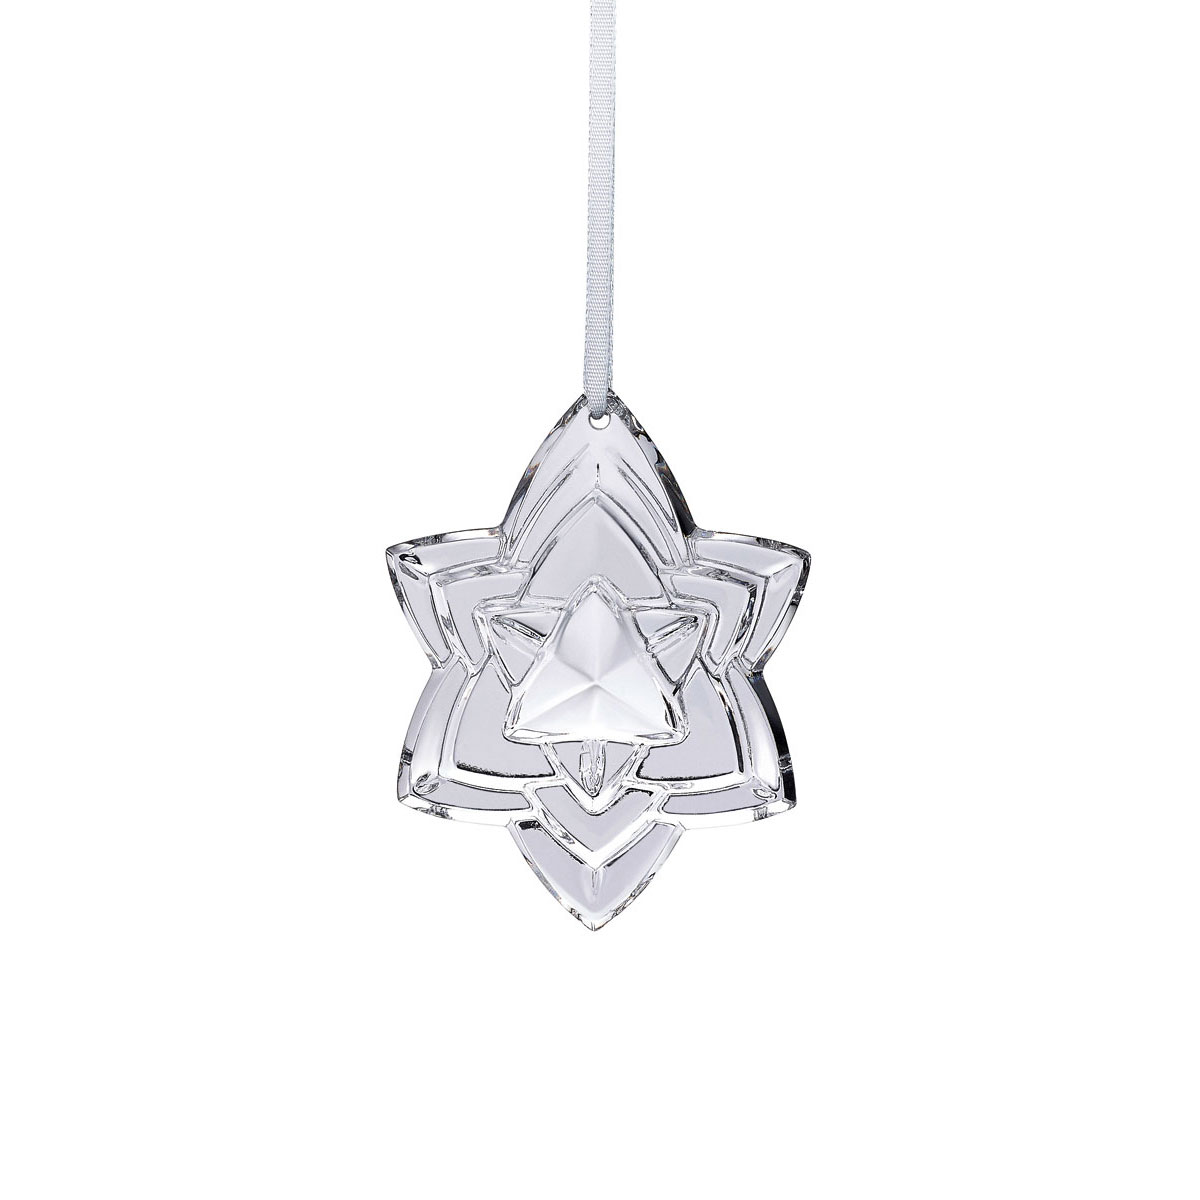 Baccarat Crystal Annual Ornament 2018, Silver